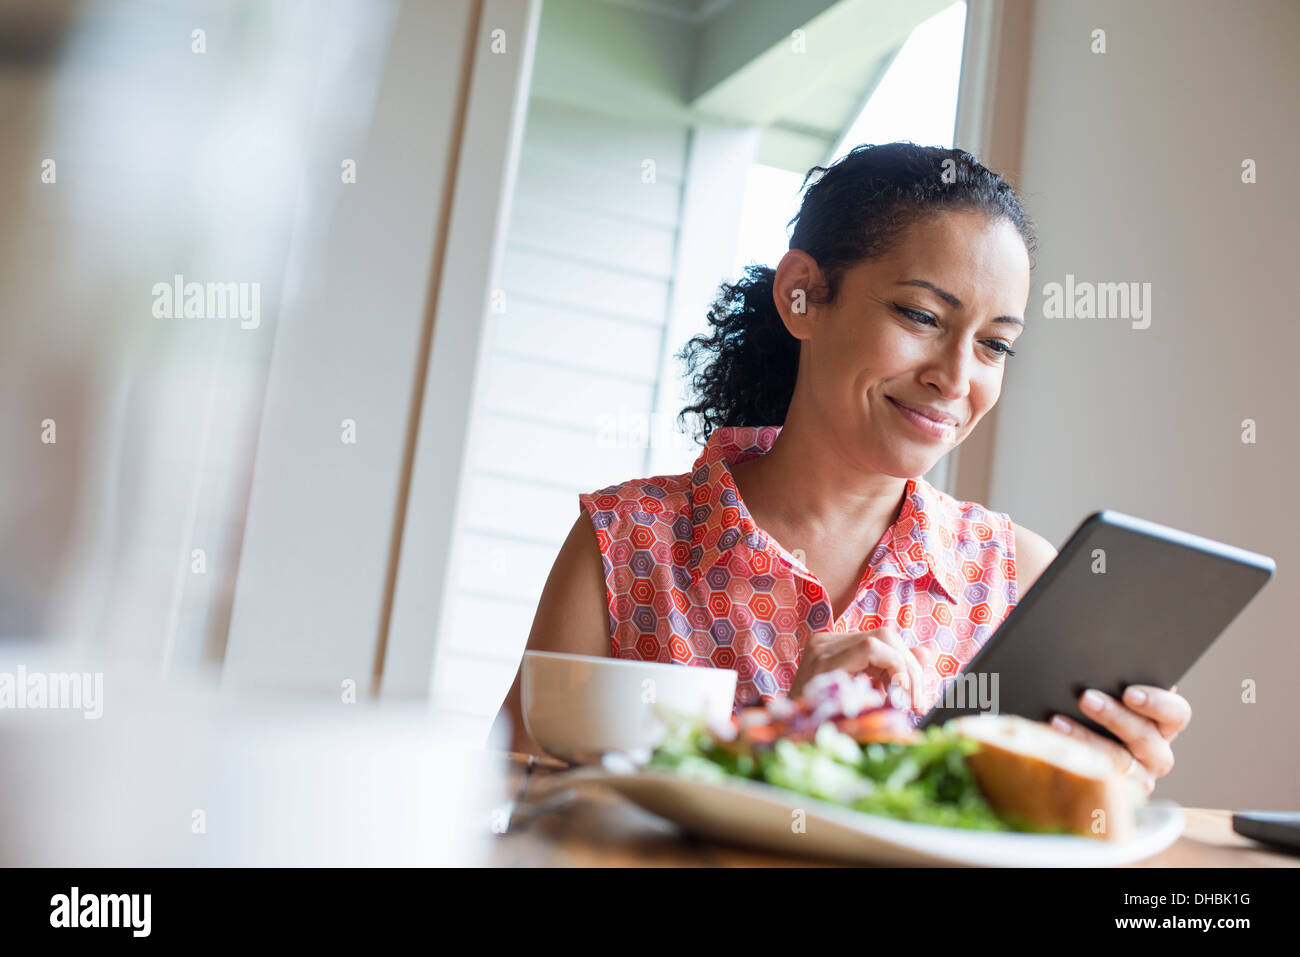 A young woman reading from the screen of a digital tablet, seated at a table. Coffee and a sandwich. Stock Photo